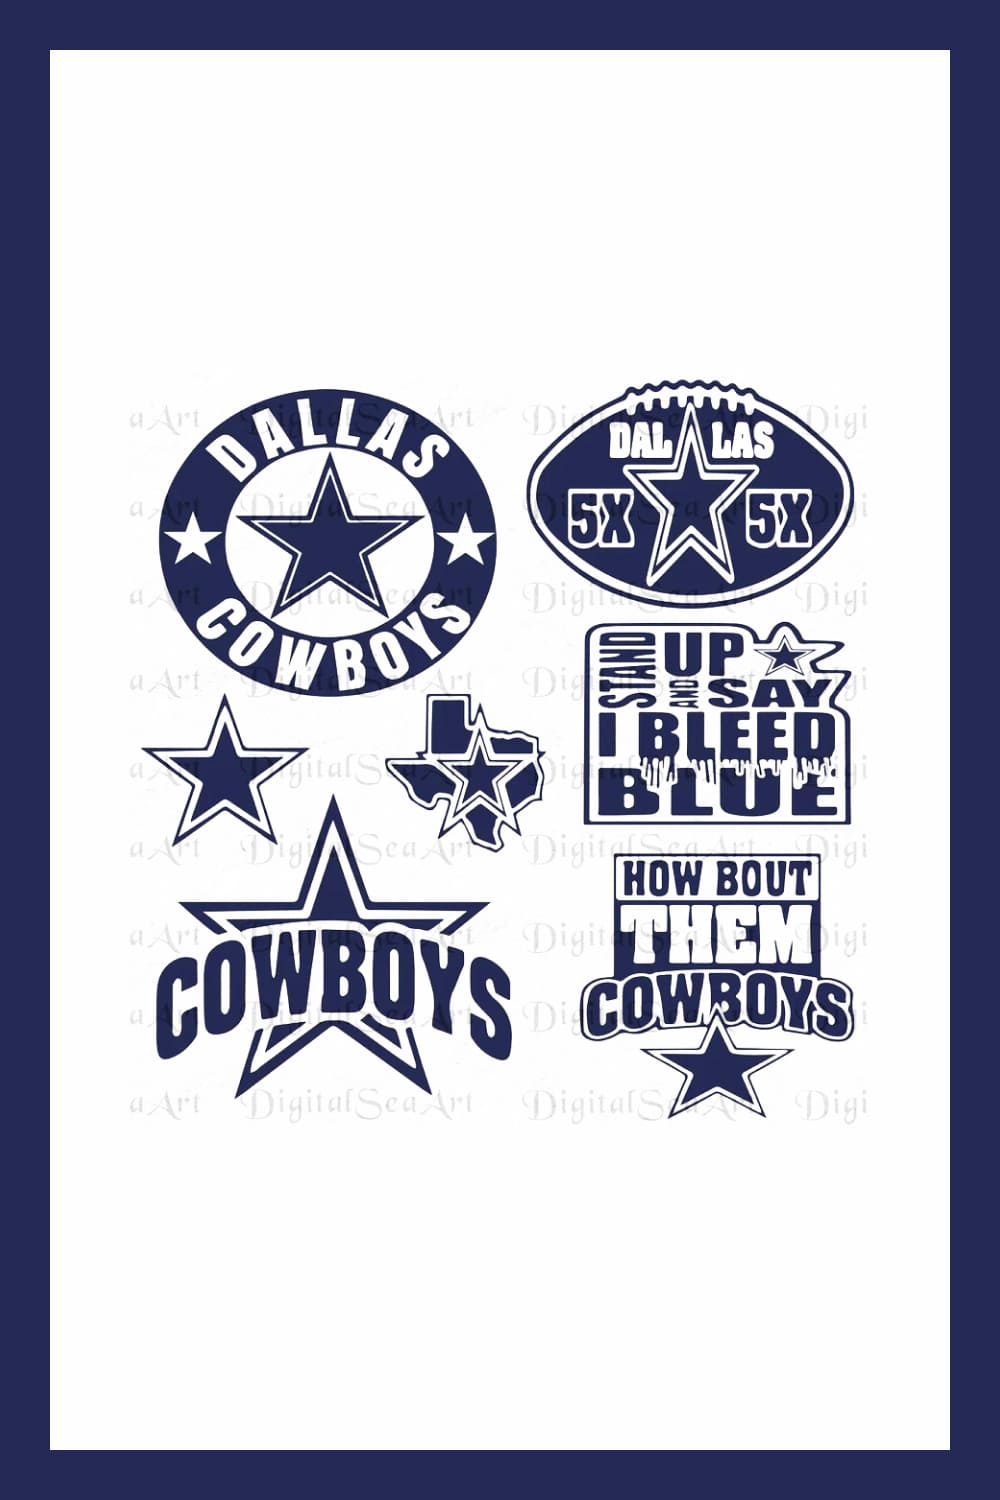 Collage of logos in blue for Dallas Cowboys.